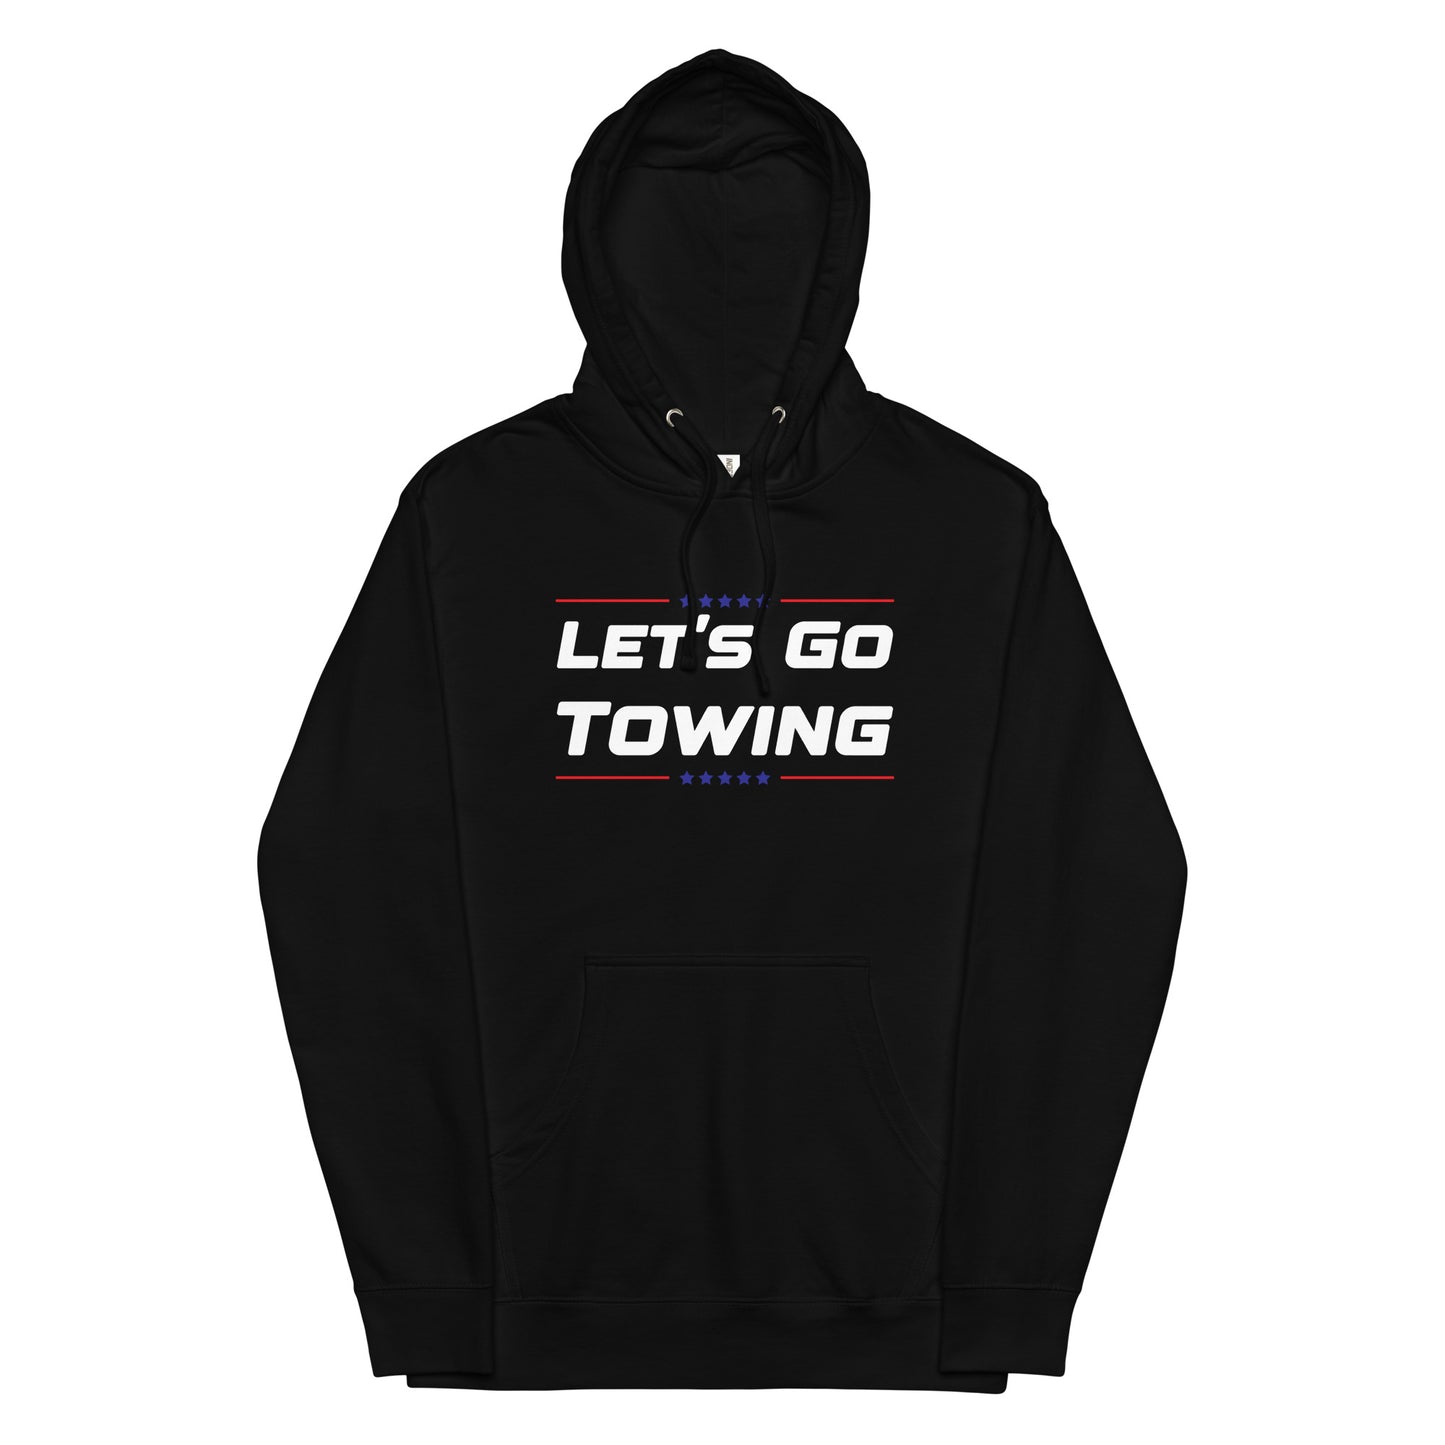 Let's Go Towing Unisex midweight hoodie